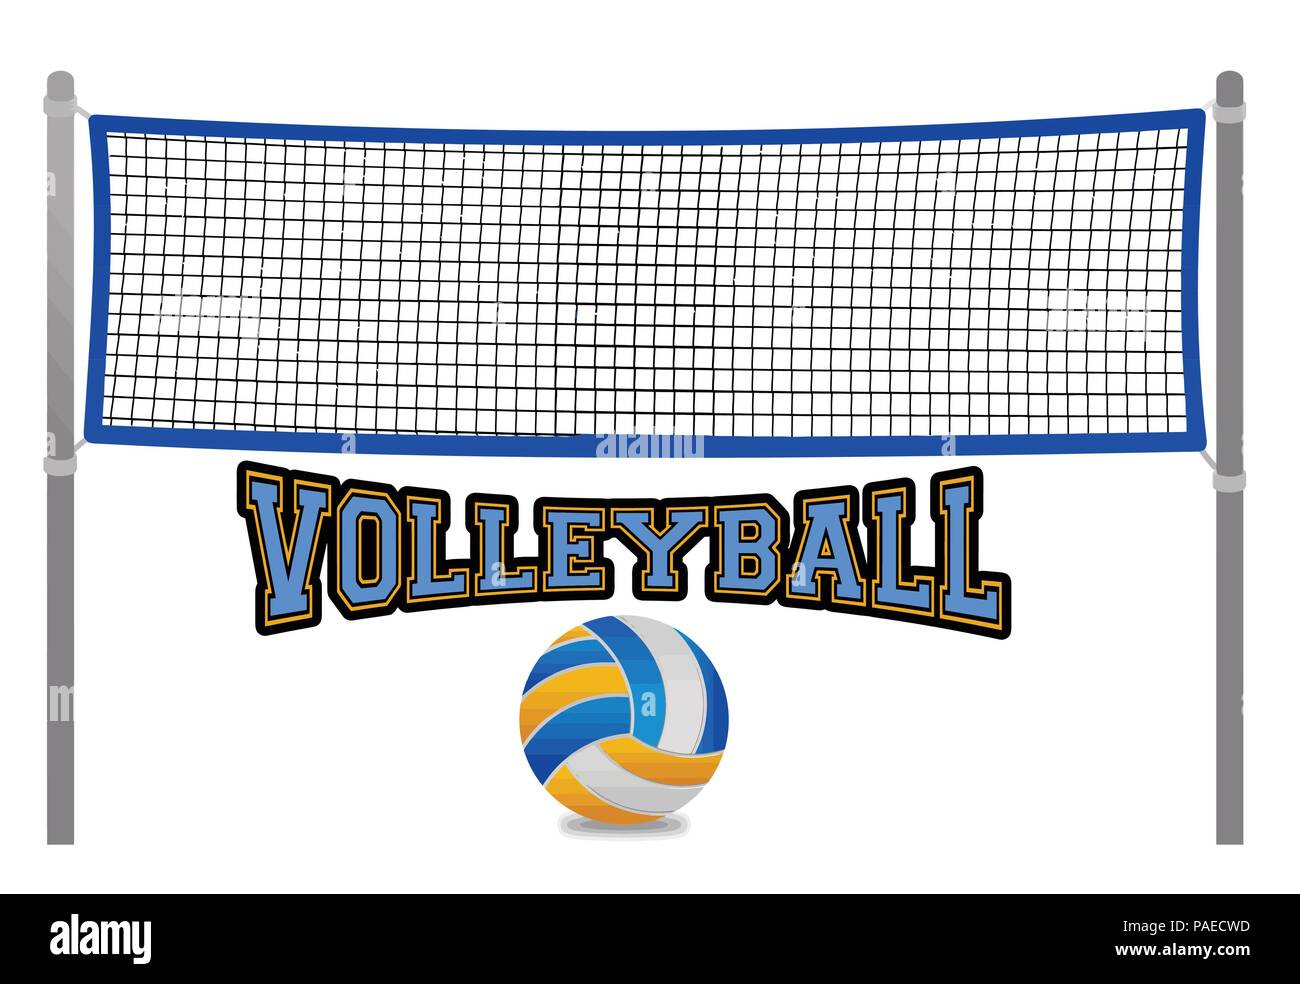 Volleyball Network Volleyball Flying Ball Stock Vector (Royalty Free)  324833624 | Shutterstock